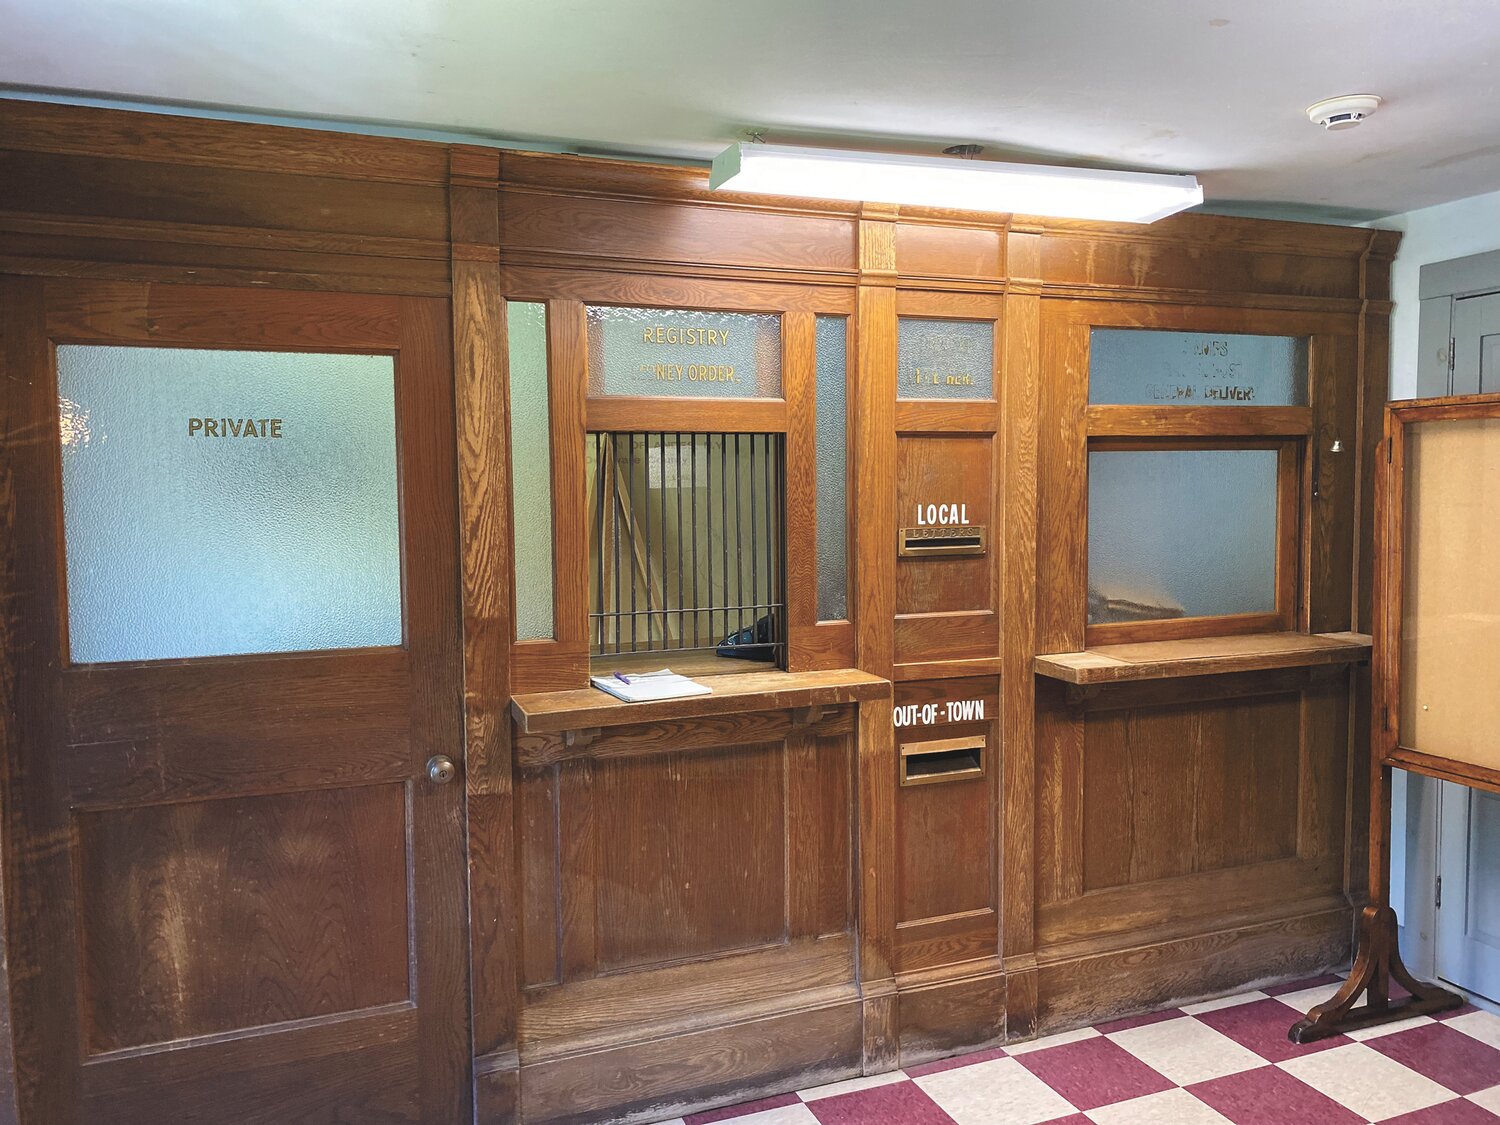 In 1953, the post office interior was removed, intact, from the corner building, where it had been located for years. Today, it is a favorite exhibit on the museum’s second floor.